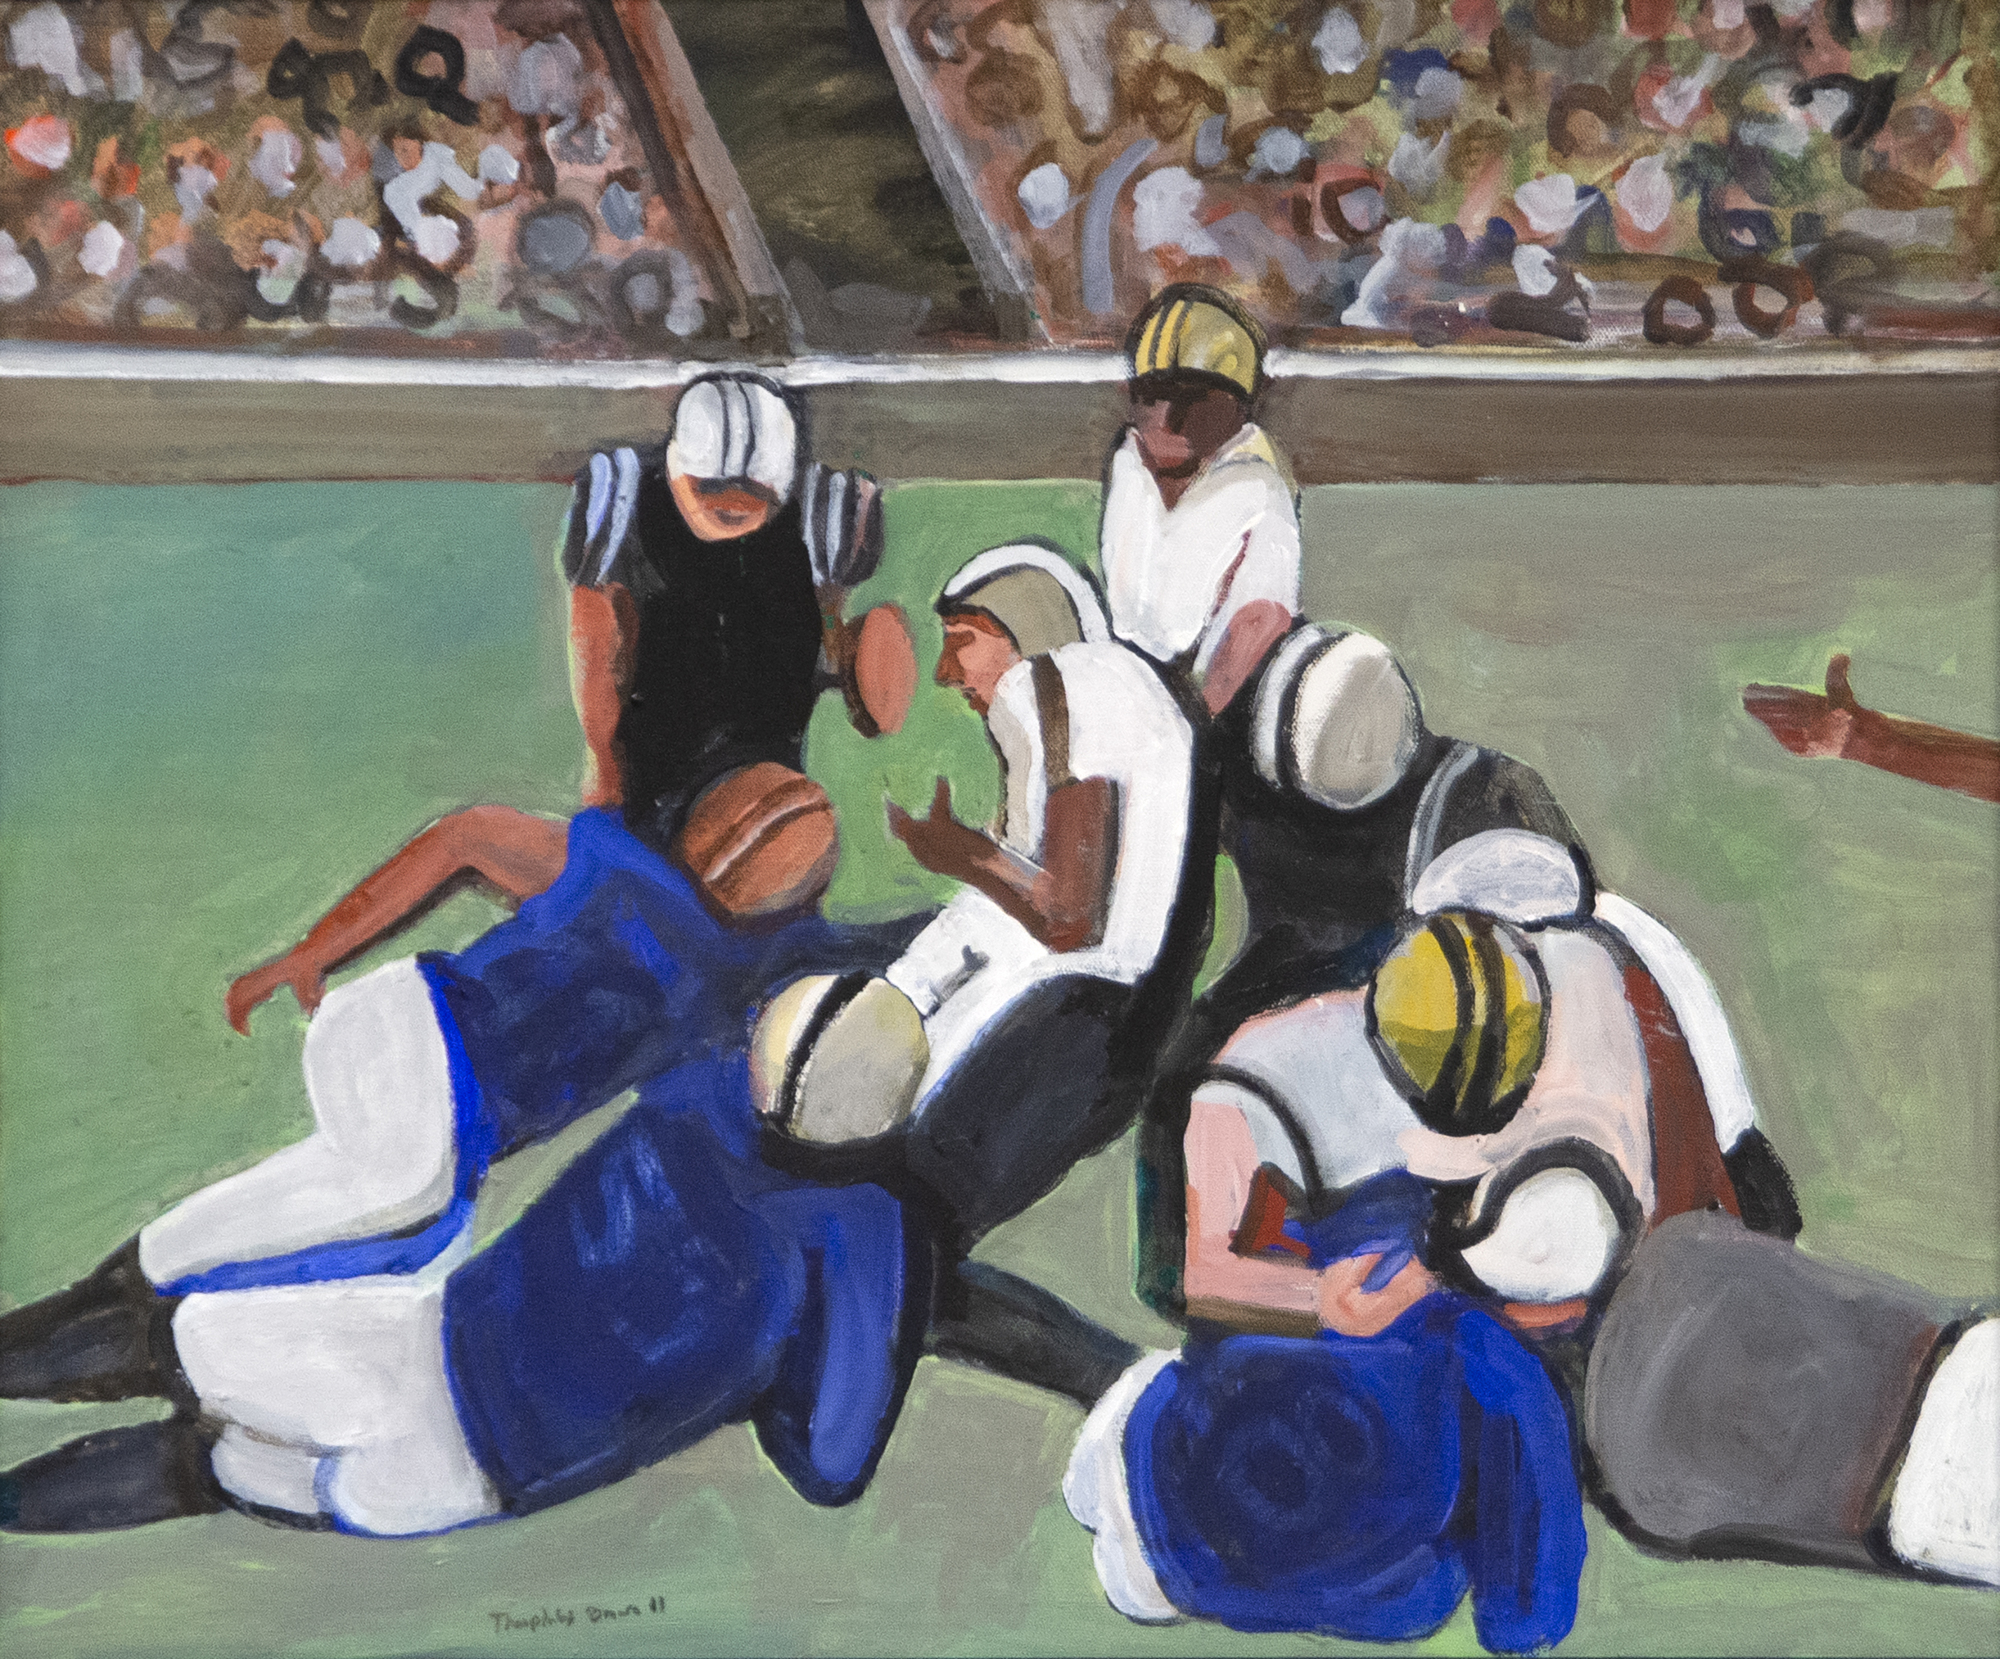 WILLIAM THEOPHILUS BROWN - Football - acrylic on canvas - 19 1/2 x 23 1/2 in.